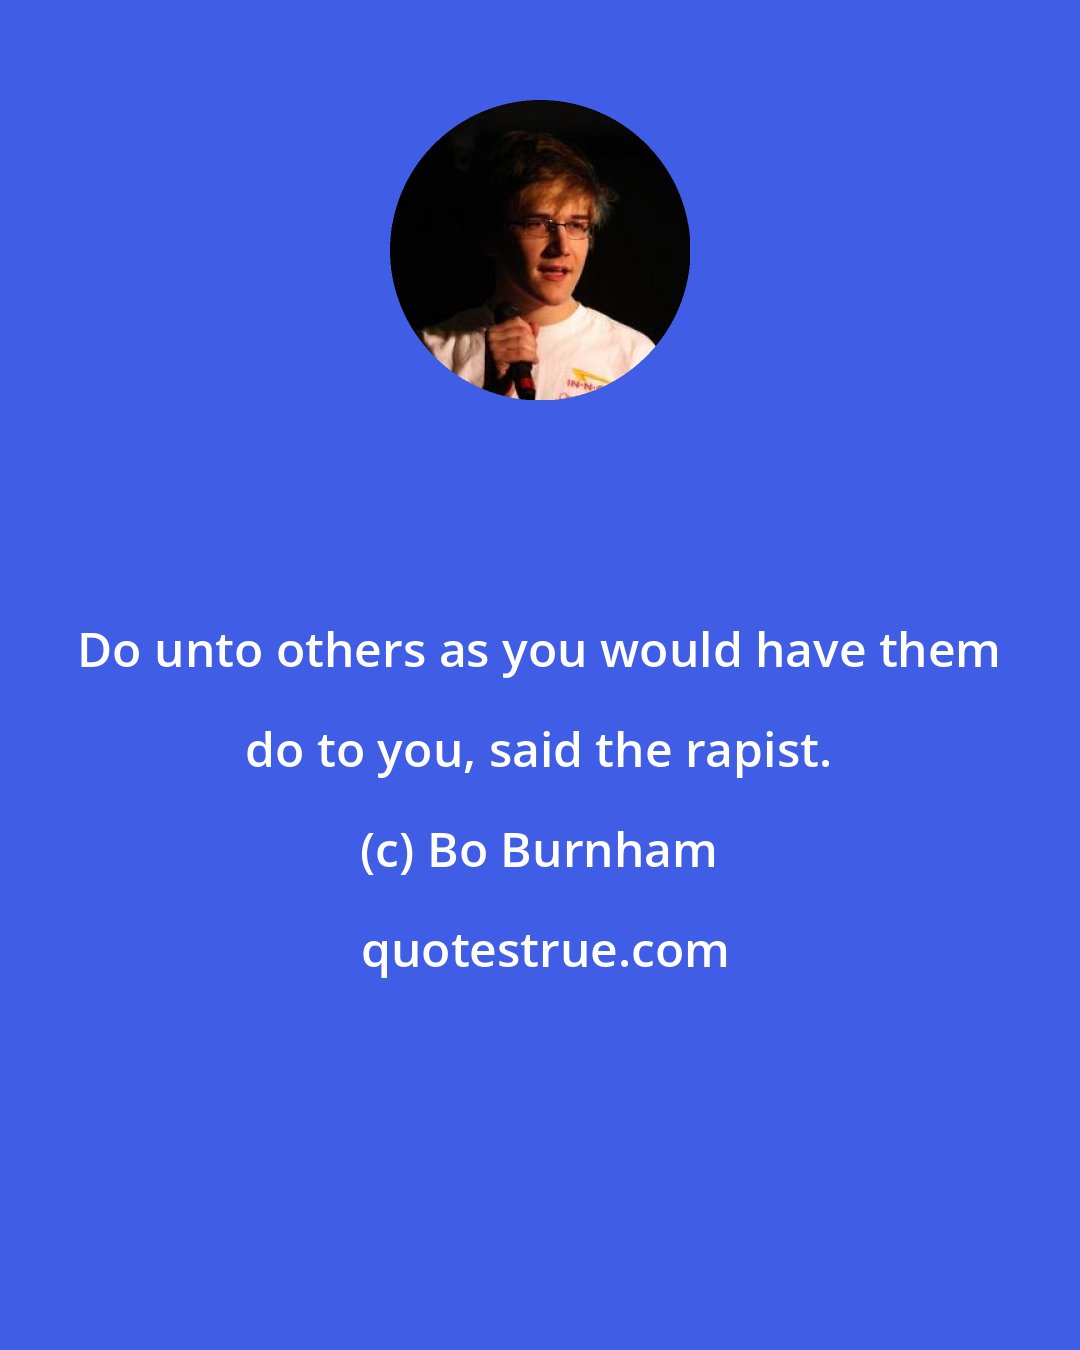 Bo Burnham: Do unto others as you would have them do to you, said the rapist.